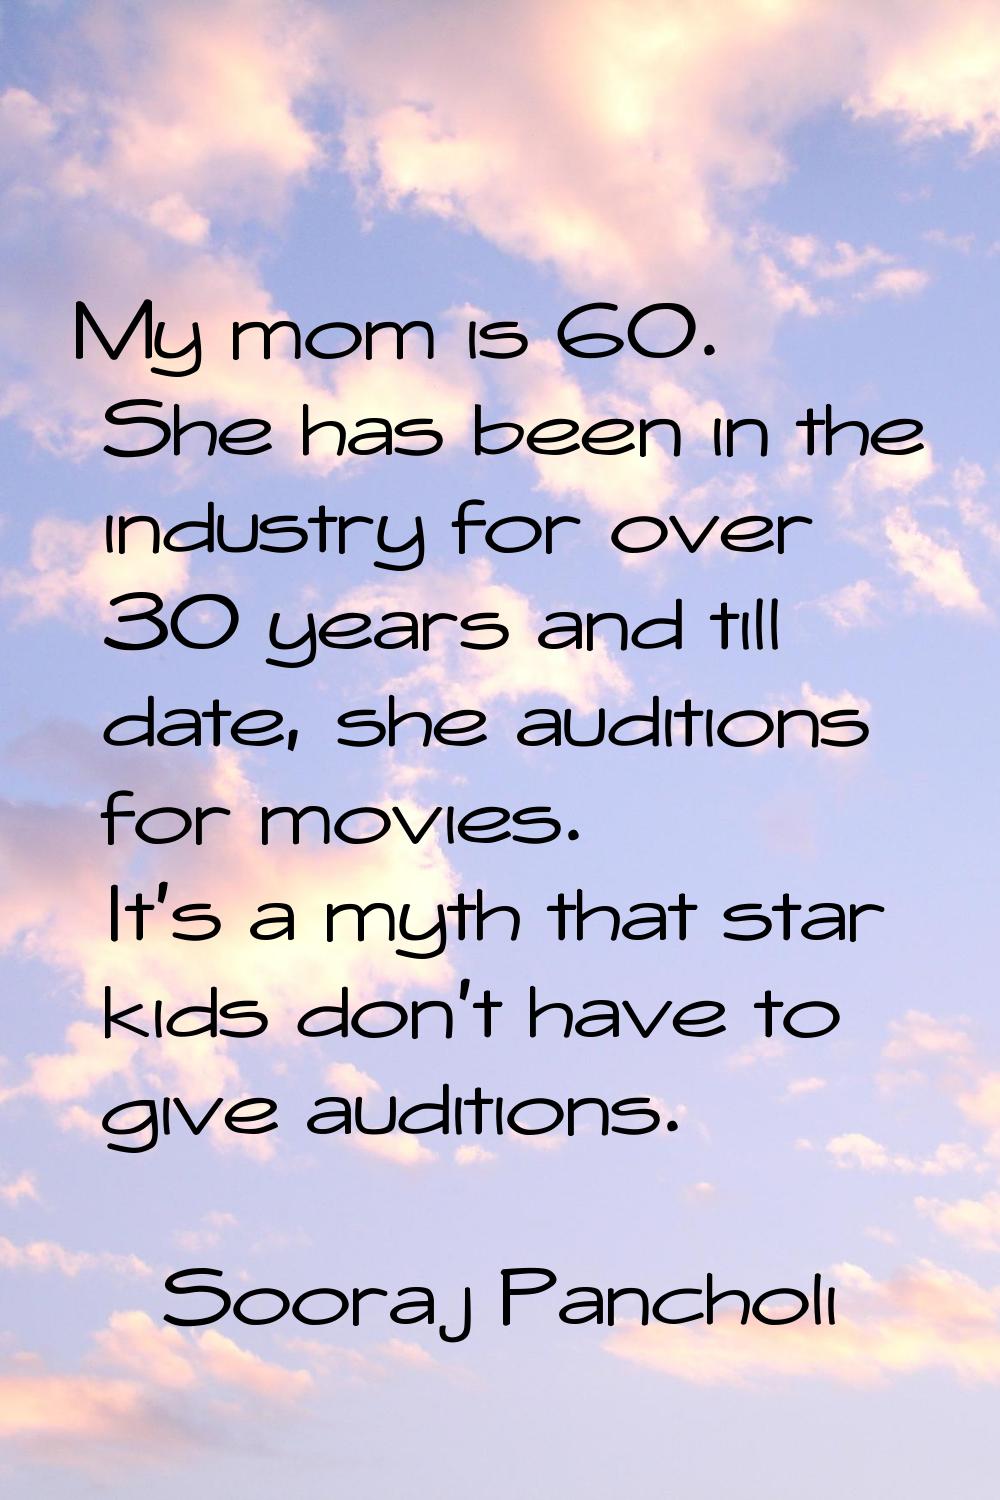 My mom is 60. She has been in the industry for over 30 years and till date, she auditions for movie